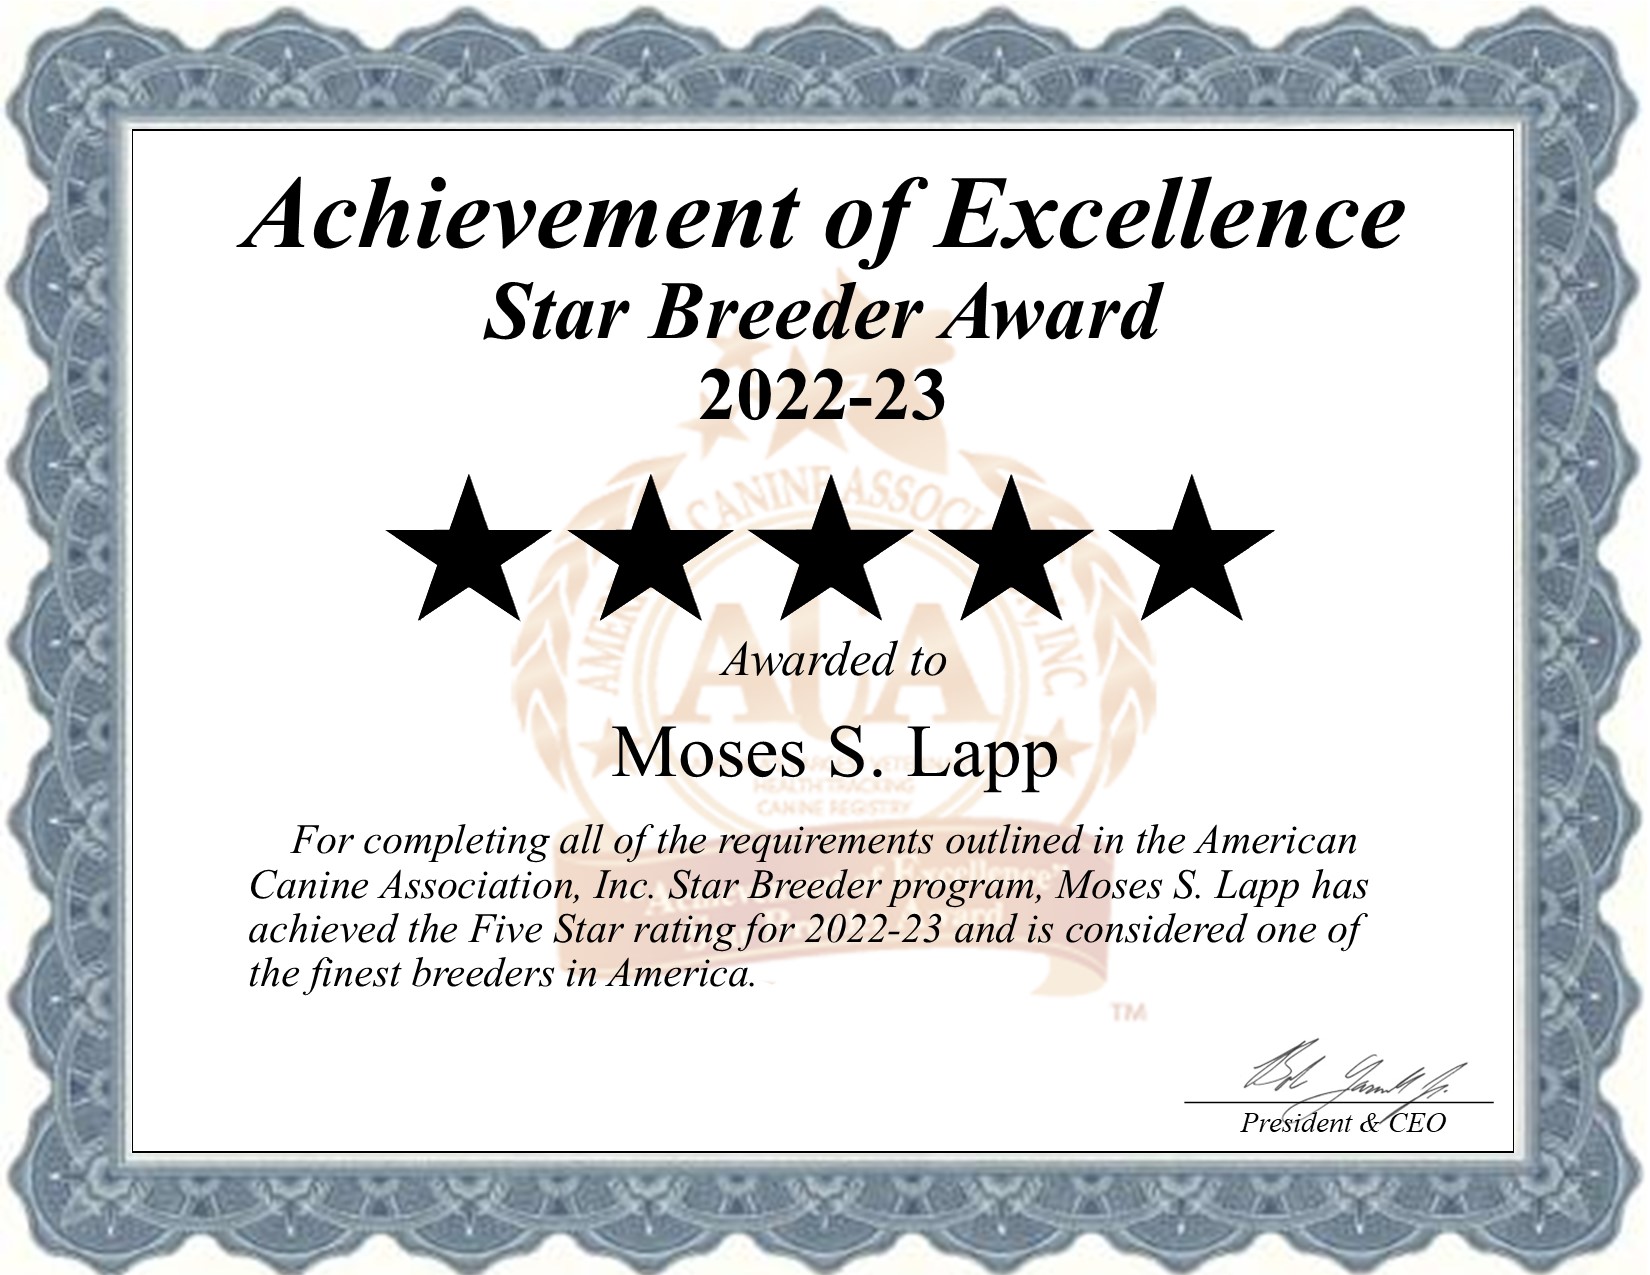 Moses, Lapp, dog, breeder, star, certificate, Moses-Lapp, Myerstown, PA, Pennsylvania, puppy, dog, kennels, mill, puppymill, usda, 5-star, aca, ica, registered, poode, bichon, maltese